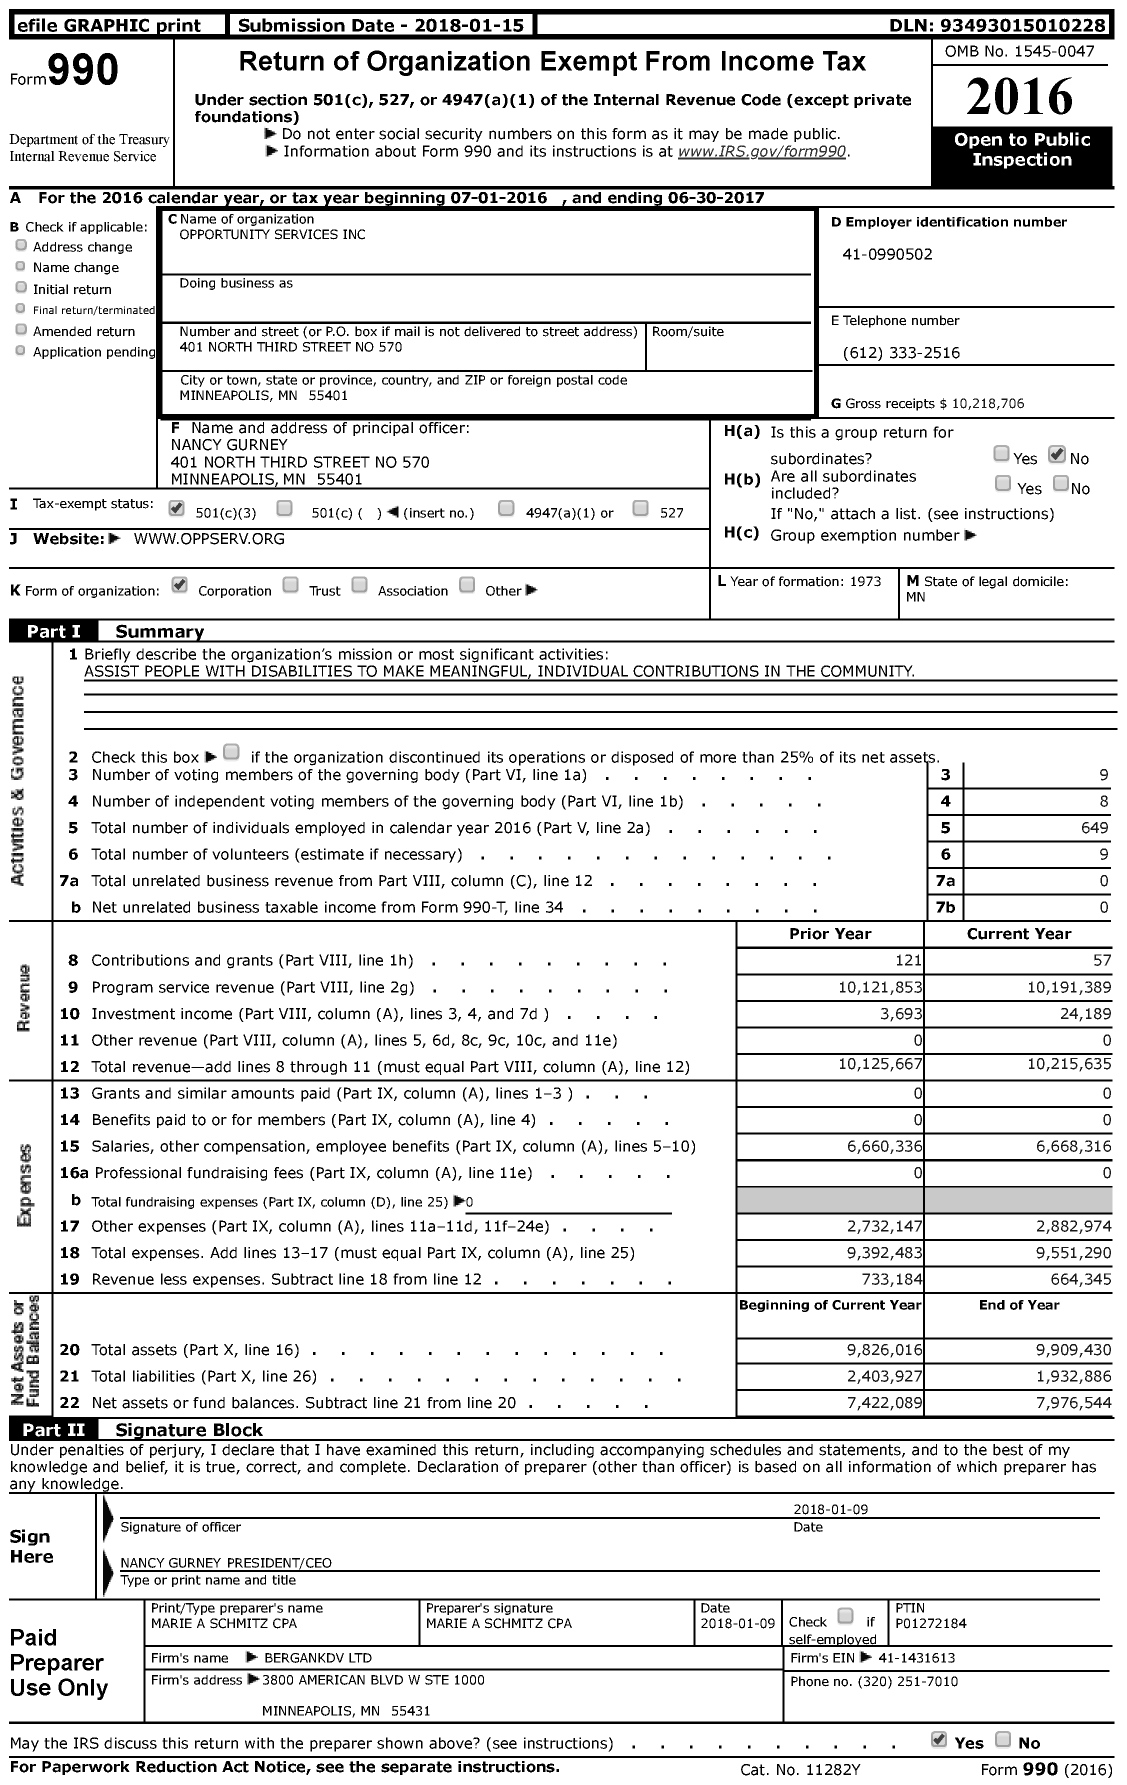 Image of first page of 2016 Form 990 for Opportunity Services (OS)